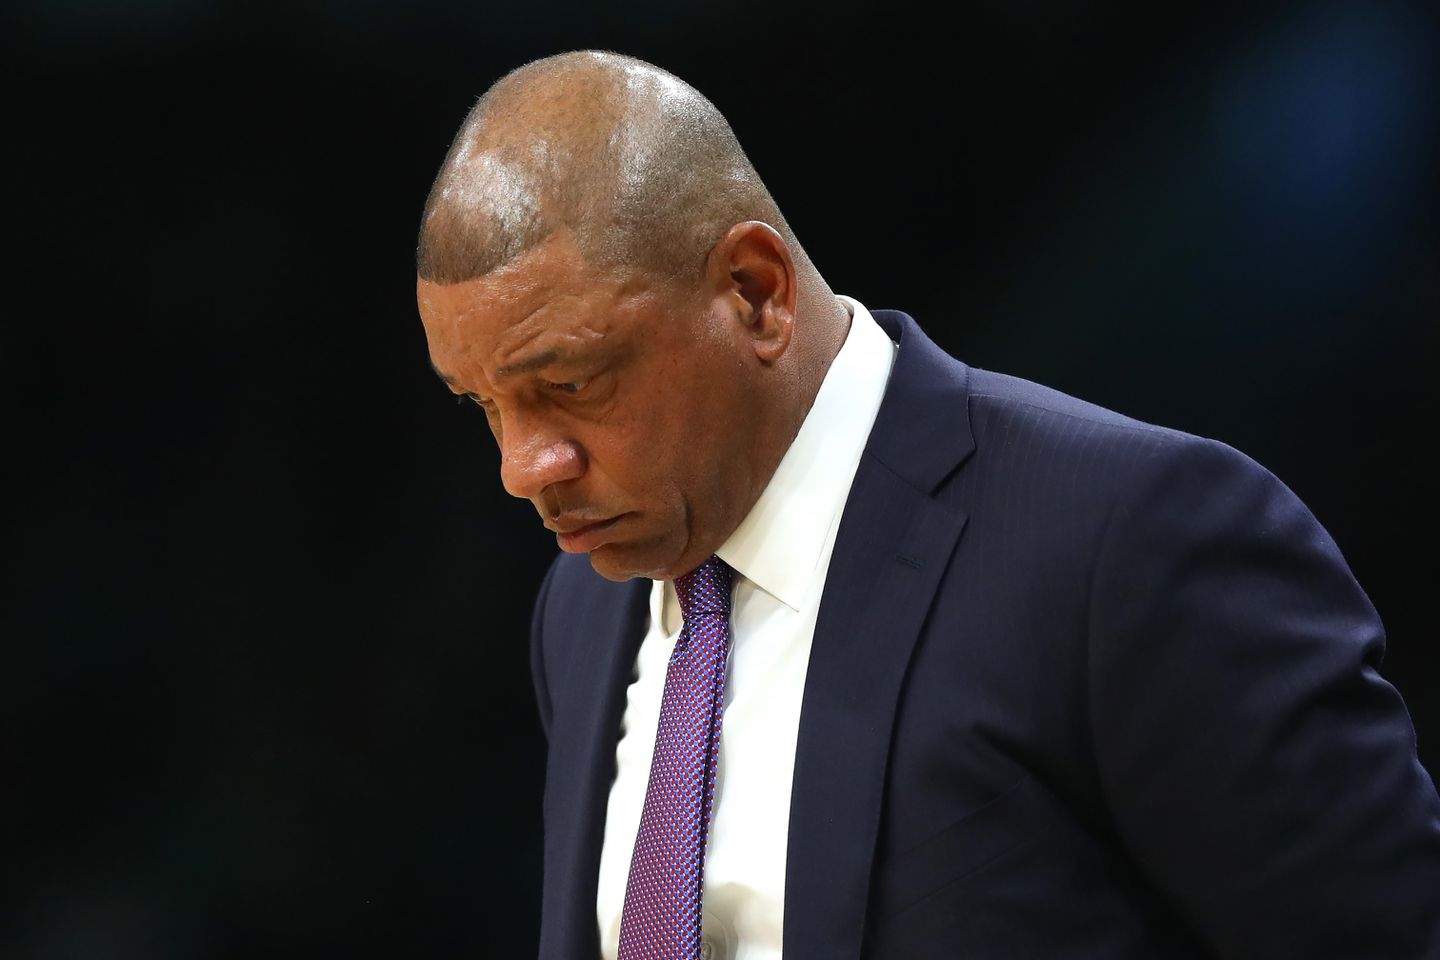 Doc Rivers Describes the Ben Simmons Situation as ‘No Fun’